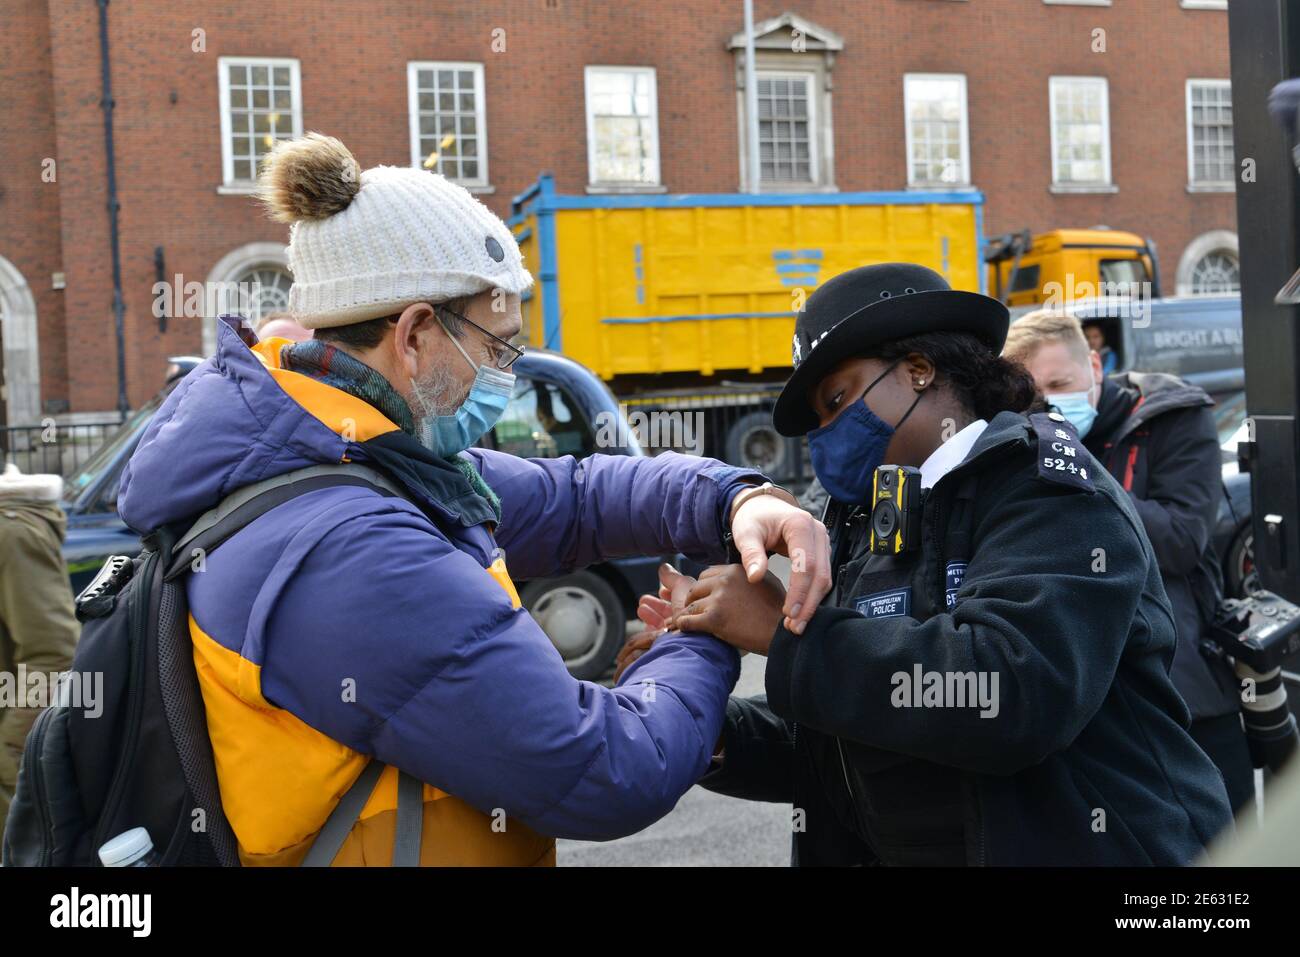 A protester from StopHS2 rebellion is arrested and handcuffed by police during the demonstration.High Speed 2 (HS2) is a planned high speed railway in the United Kingdom, with its first phase under construction. Climate Activists, and Anti-HS2 protesters (mostly from Extinction Rebellion and “Stop HS2” Activists) set up a camp in Euston Square near Euston Station, They have built tree houses and occupied tunnels under Euston Square gardens to protest against the high speed railway. Stock Photo